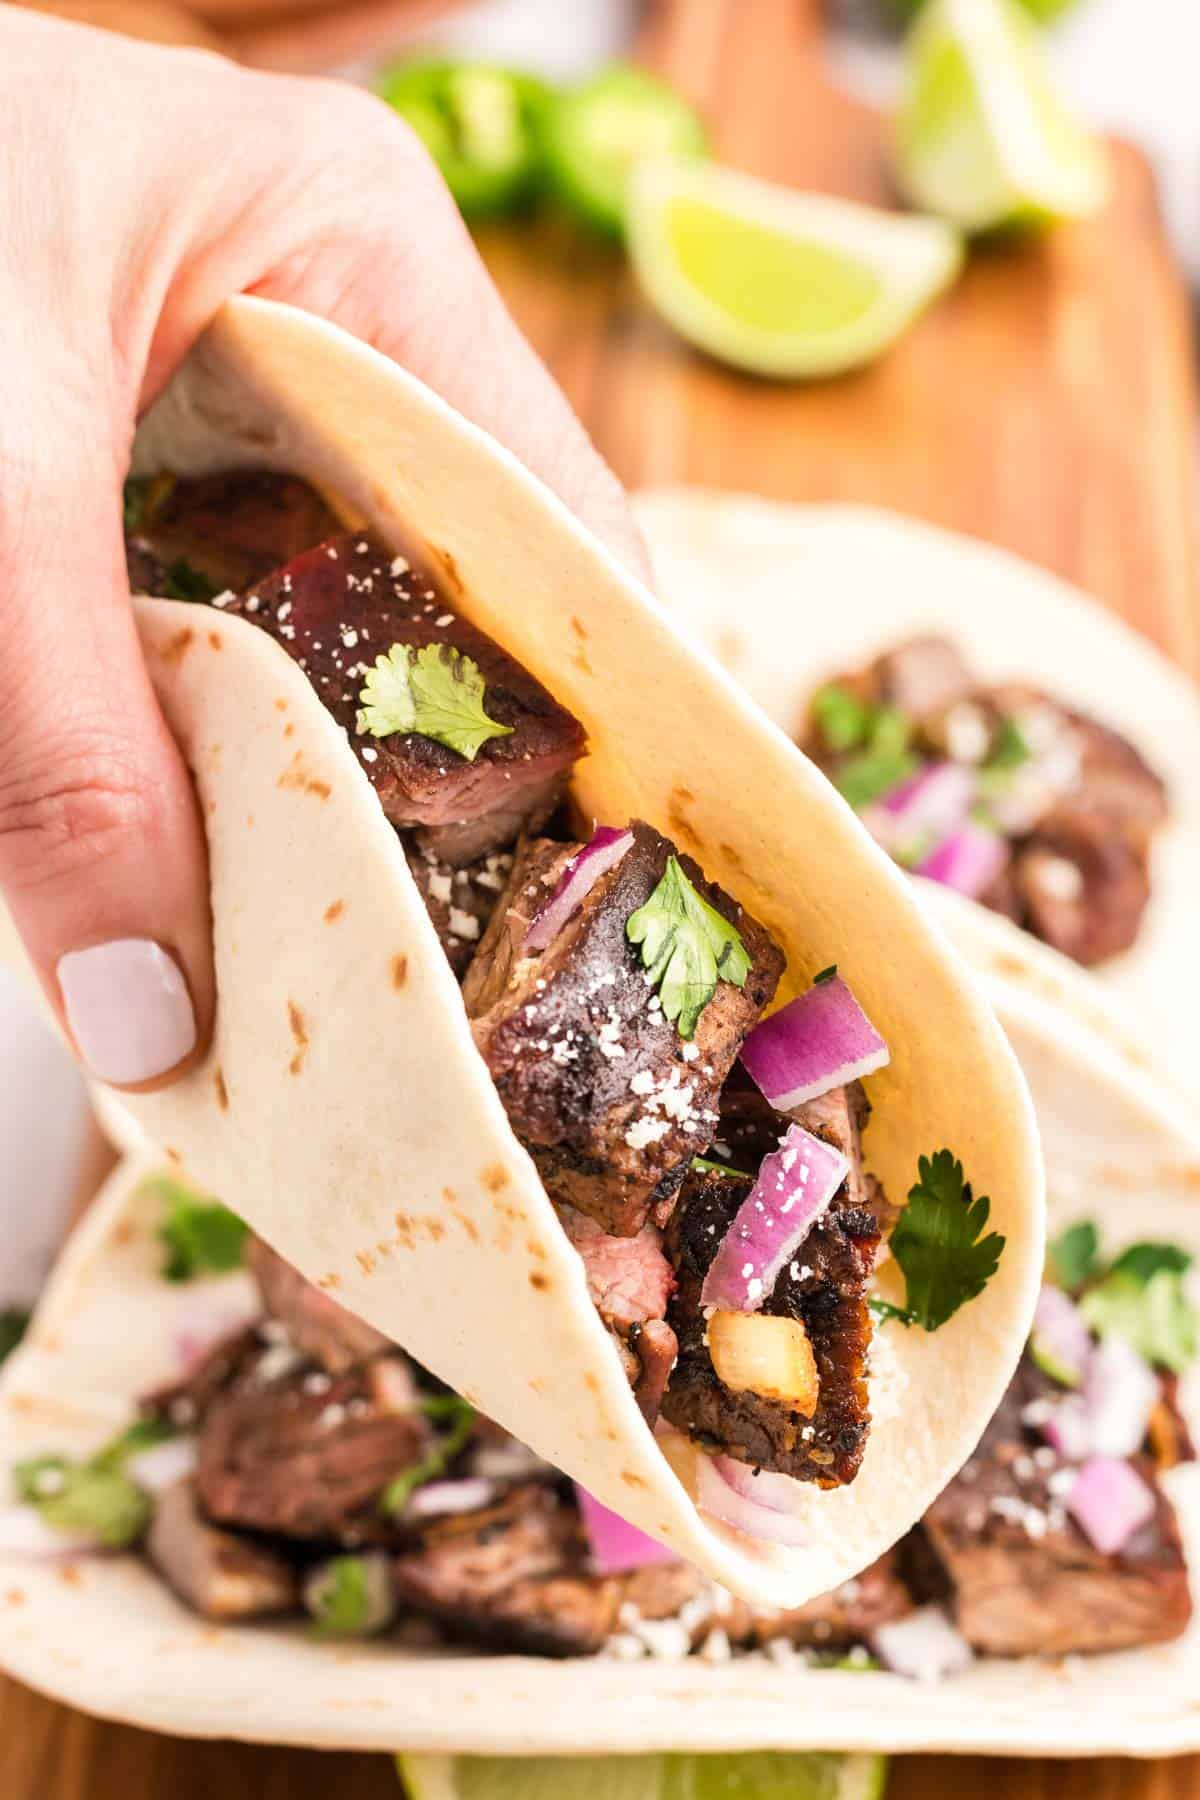 A hand picking up a carne asada street taco garnished with onion, cilantro and cotija cheese.